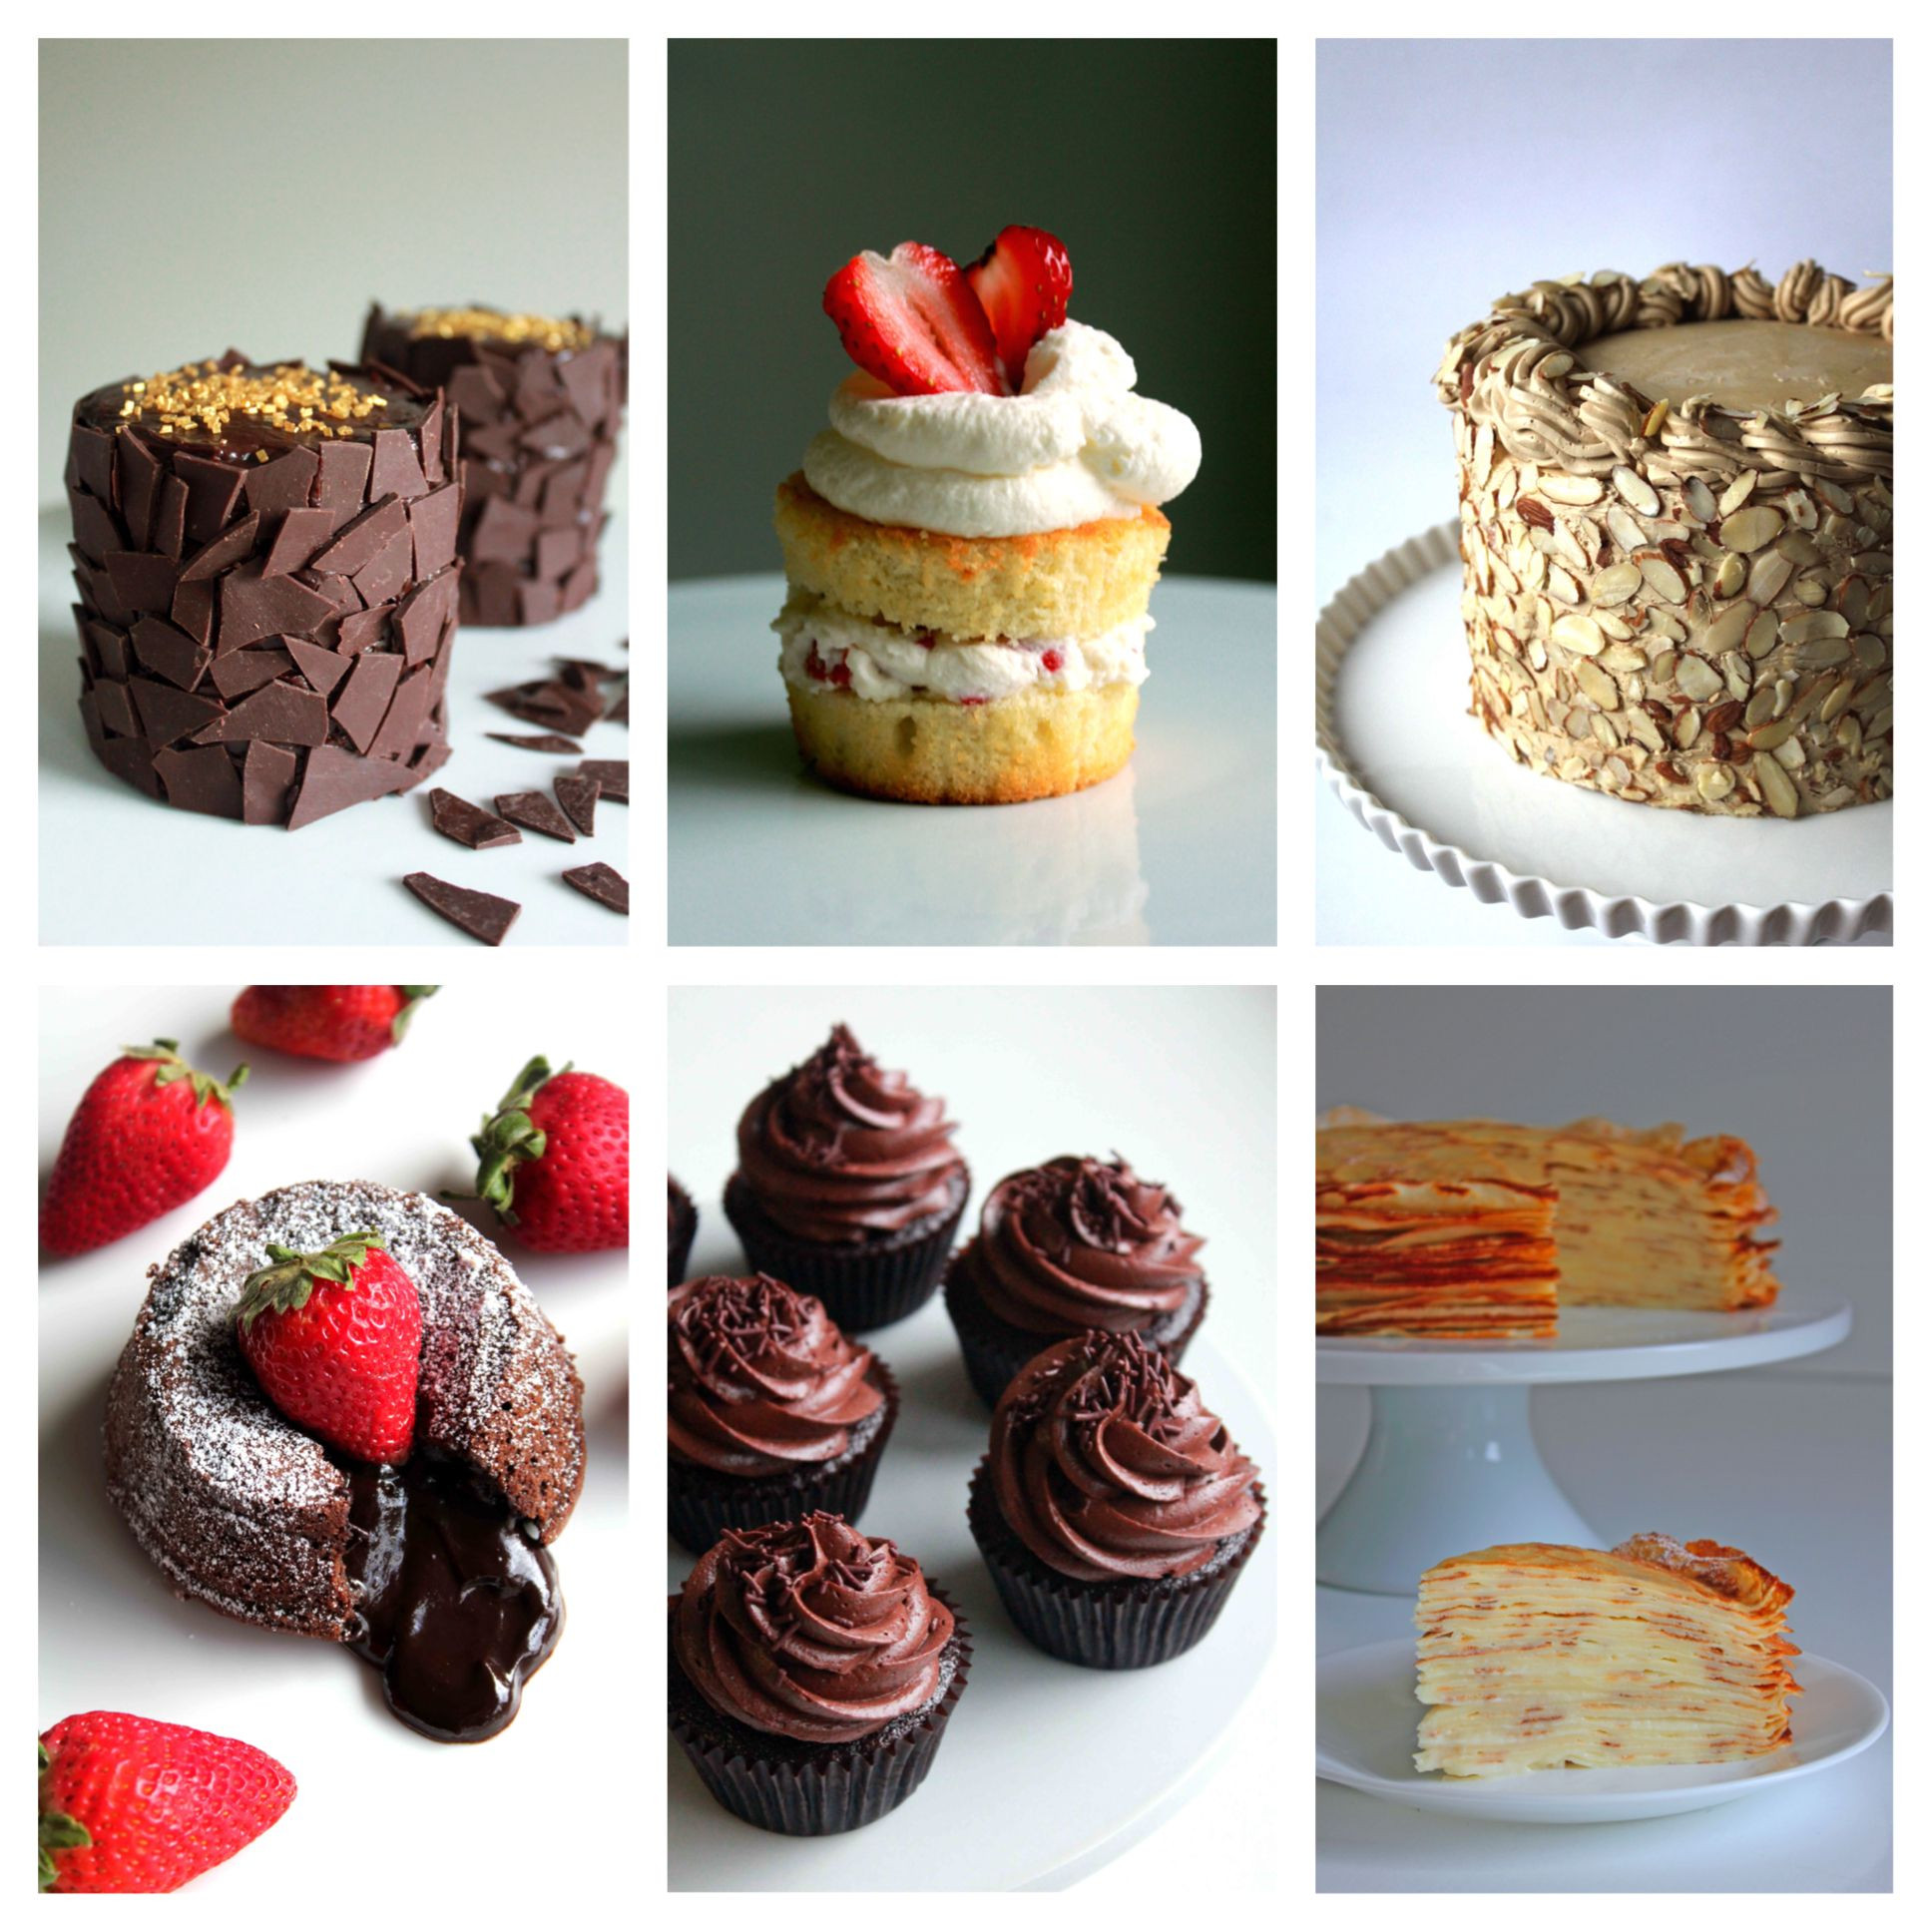 Crowd Pleasing Desserts
 12 Crowd Pleasing Thanksgiving Desserts By ohsweetday